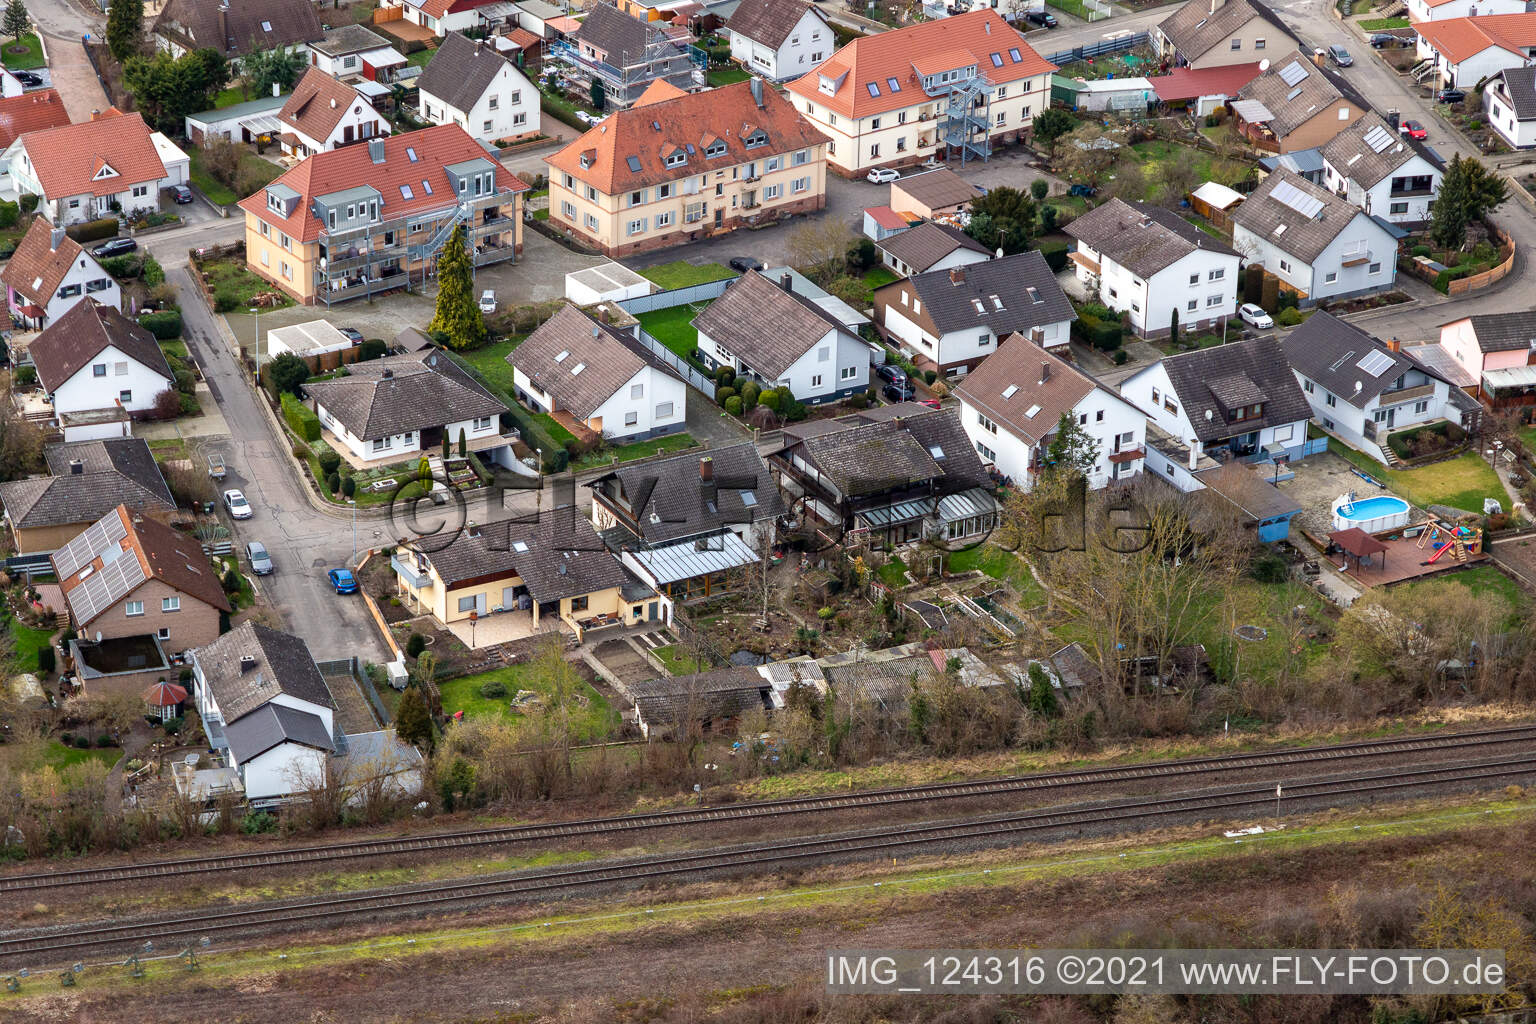 Aerial view of In the rose garden in Winden in the state Rhineland-Palatinate, Germany